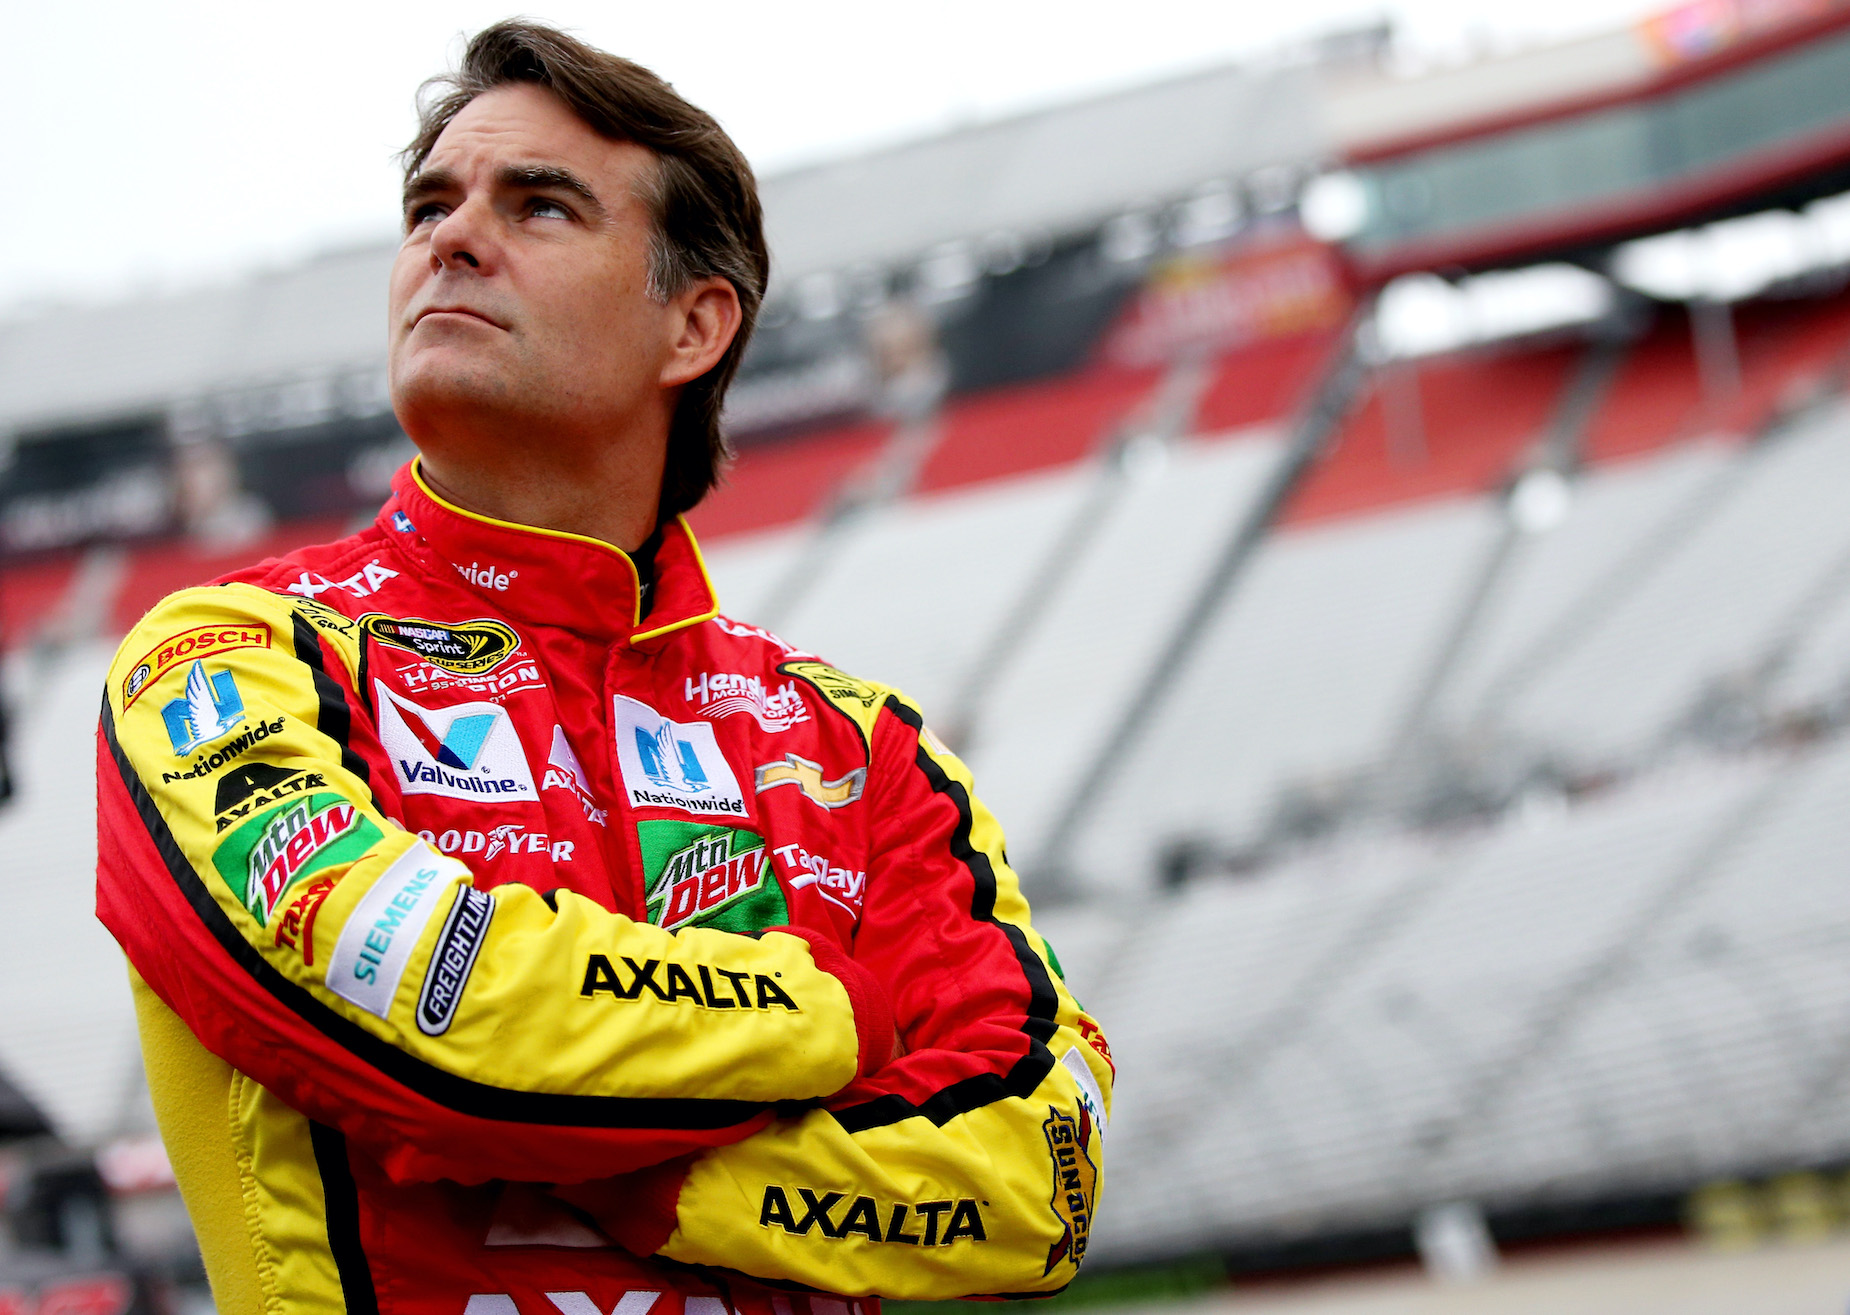 NASCAR star Jeff Gordon stands outside of his car during practice.